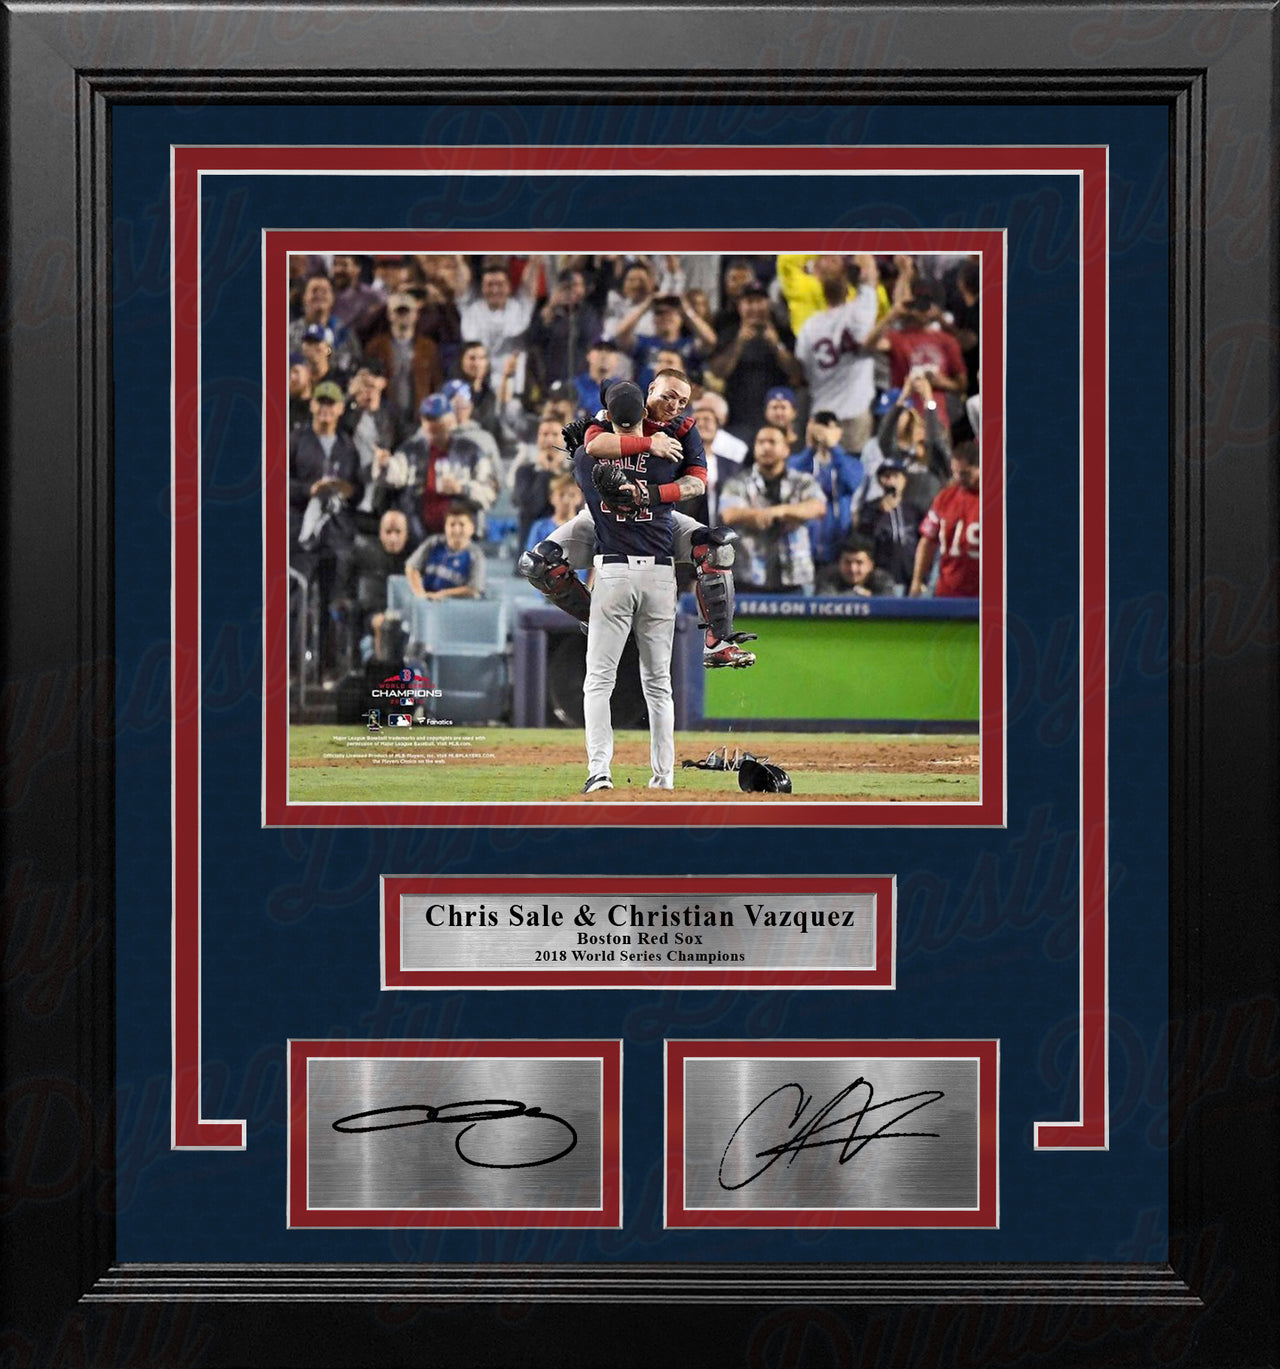 Chris Sale & Christian Vazquez Red Sox 2018 World Series 8x10 Framed Photo with Engraved Autographs - Dynasty Sports & Framing 